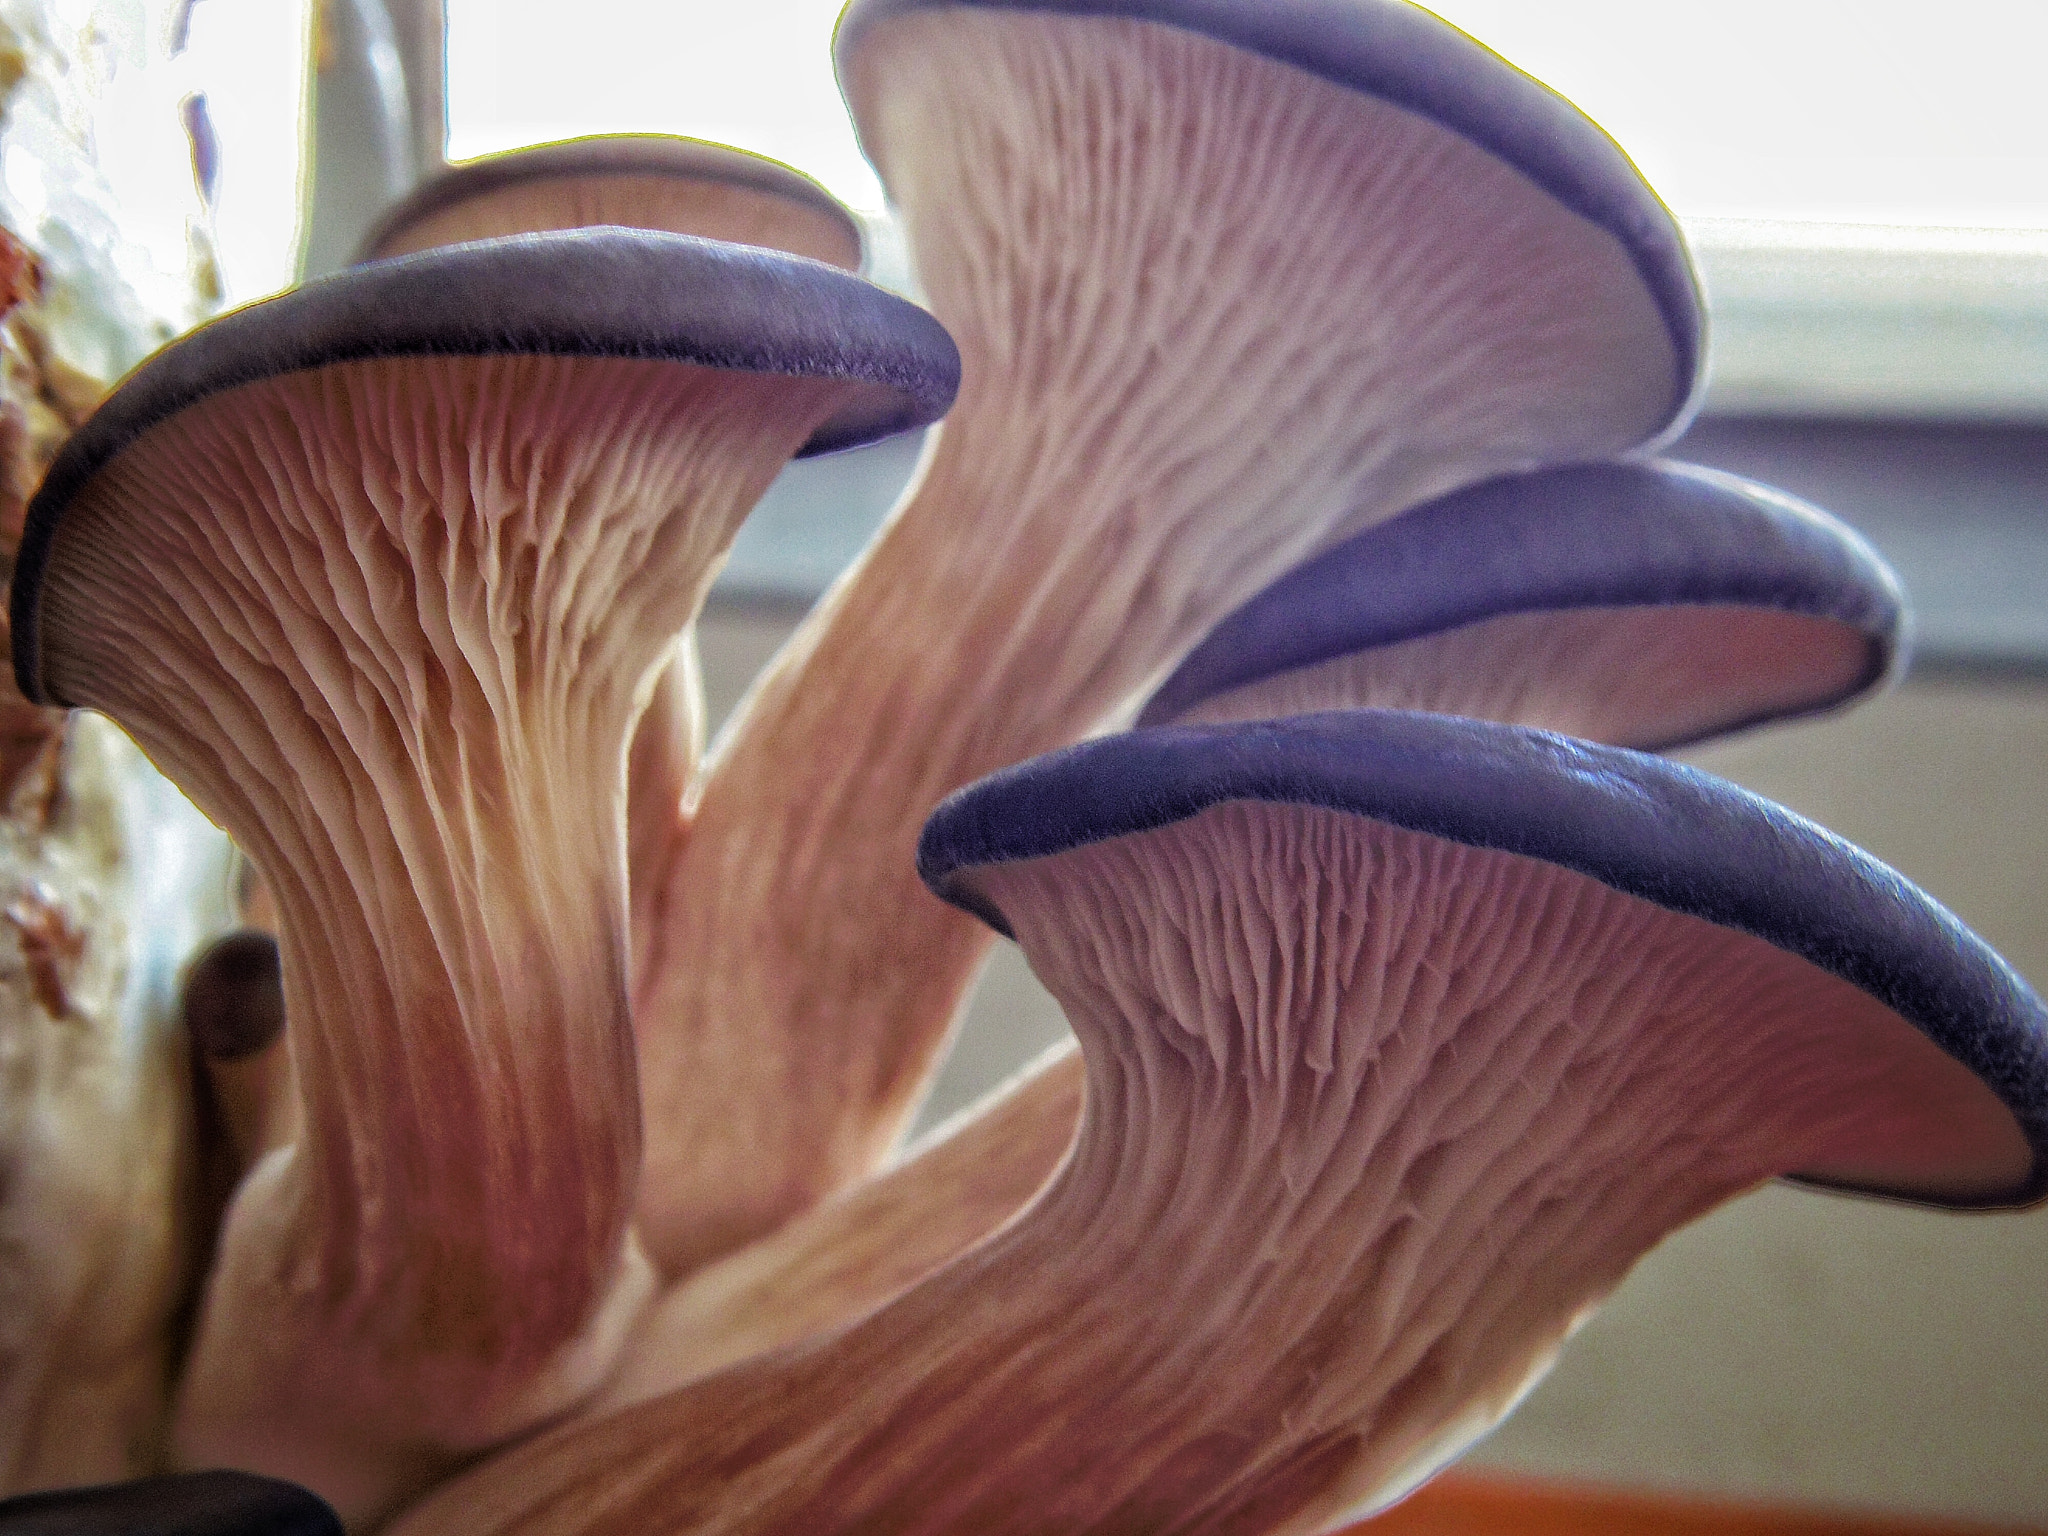 Pentax Q sample photo. Home-grown pearl oyster mushrooms photography